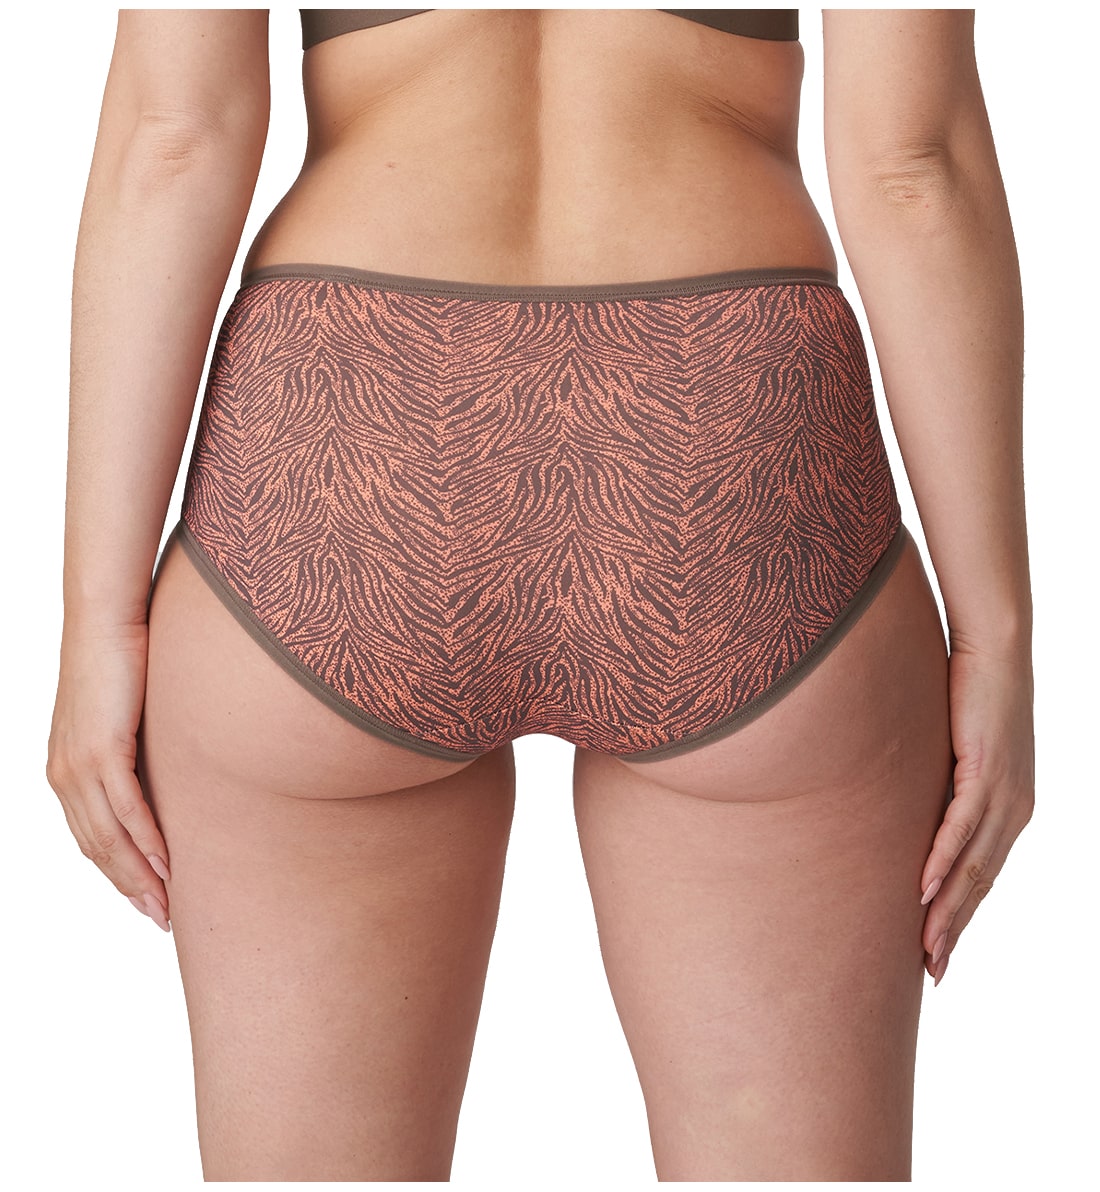 PrimaDonna Dromeas Full Sports Brief (6000650),Small,Golden Shadow - Golden Shadow,Small